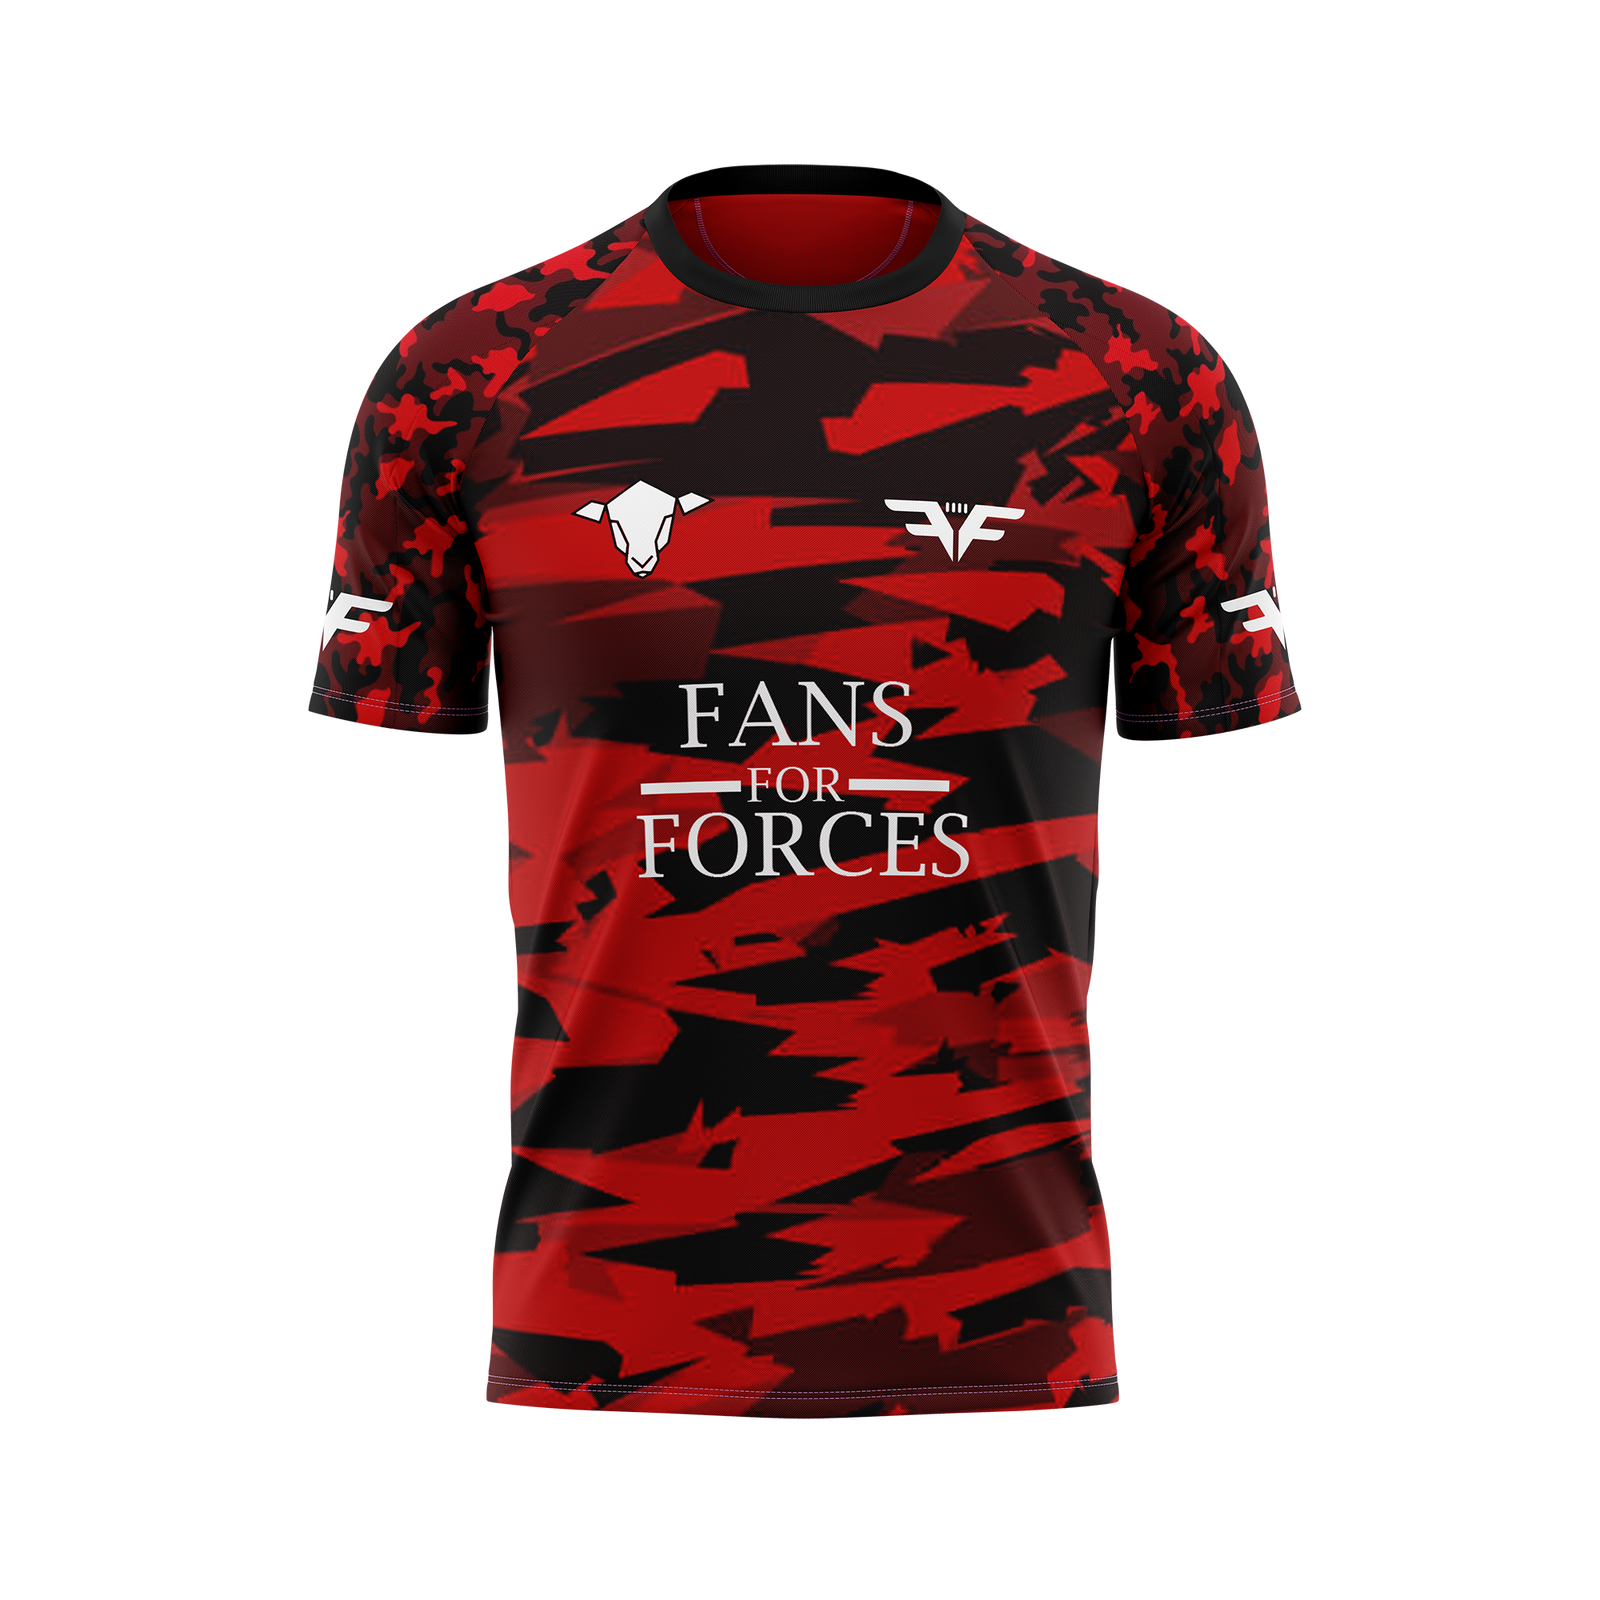 Mens Fans for Forces Heart Charity Tee